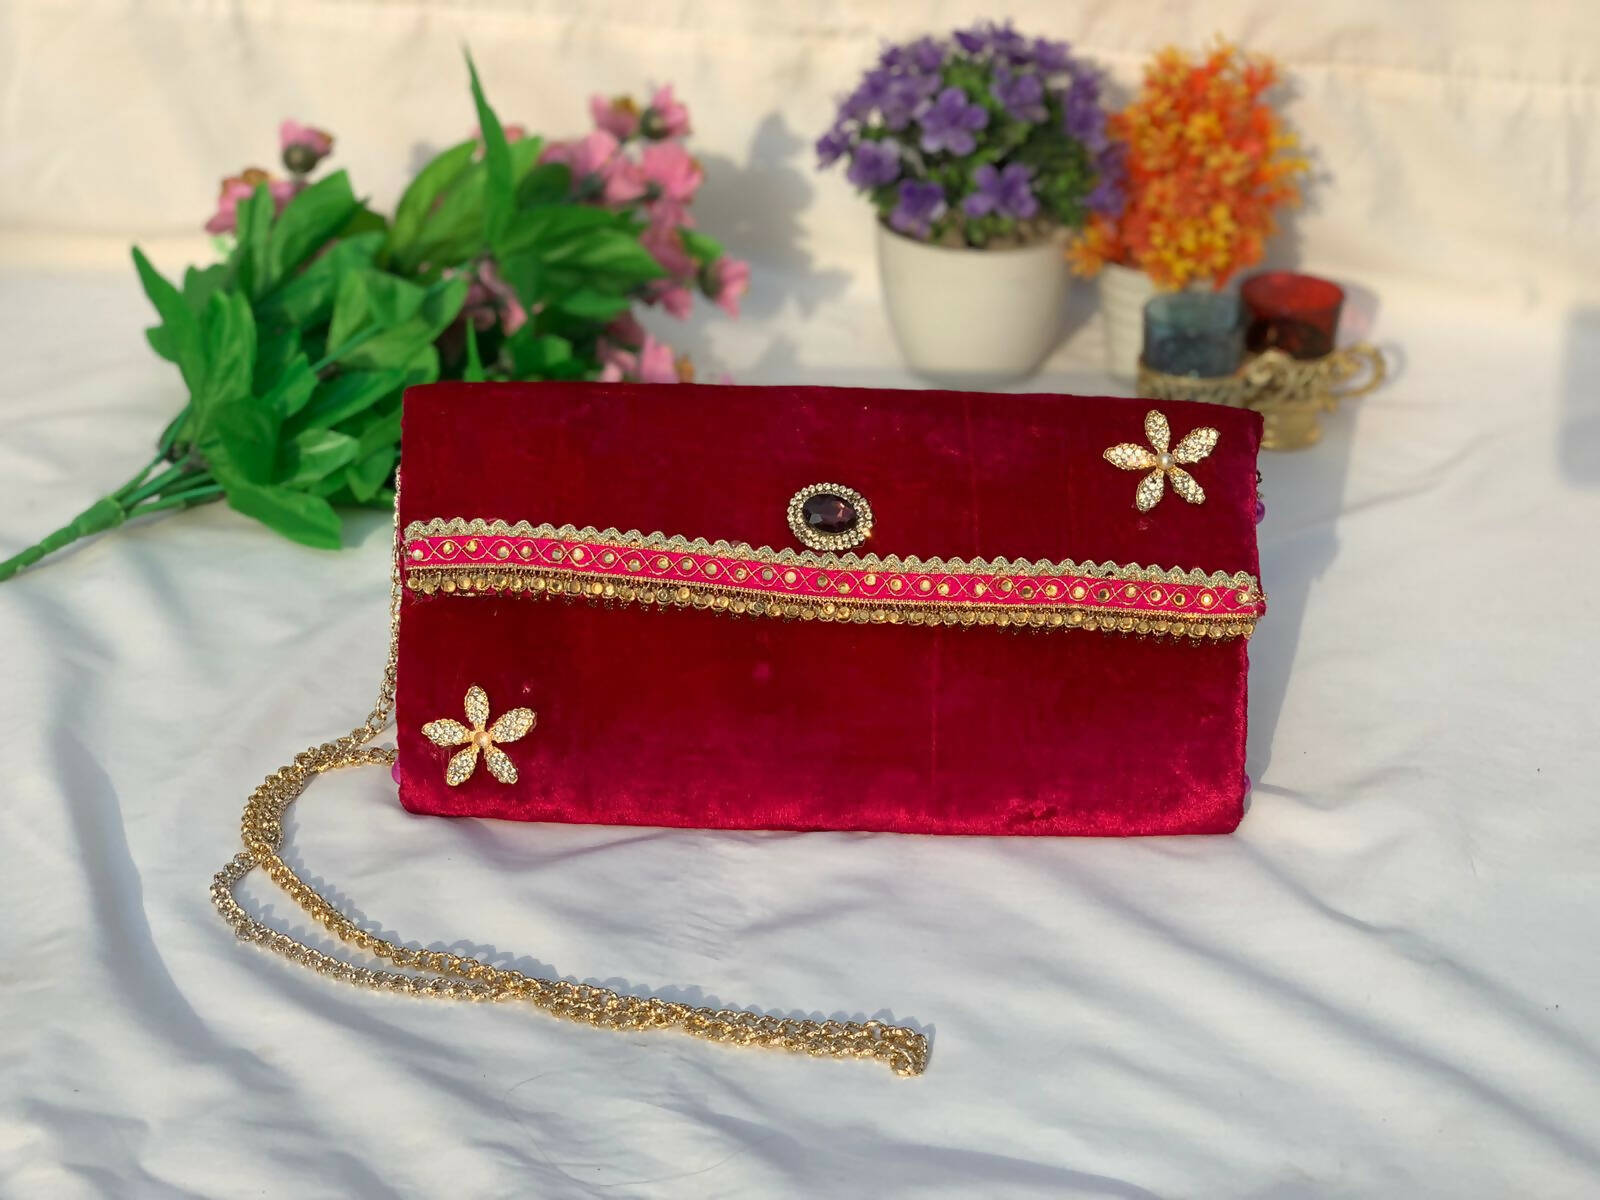 Hand Crafted Red Velvet Clutch Hand Bag With Metal Gold Chain | Women Clutch Bags | New